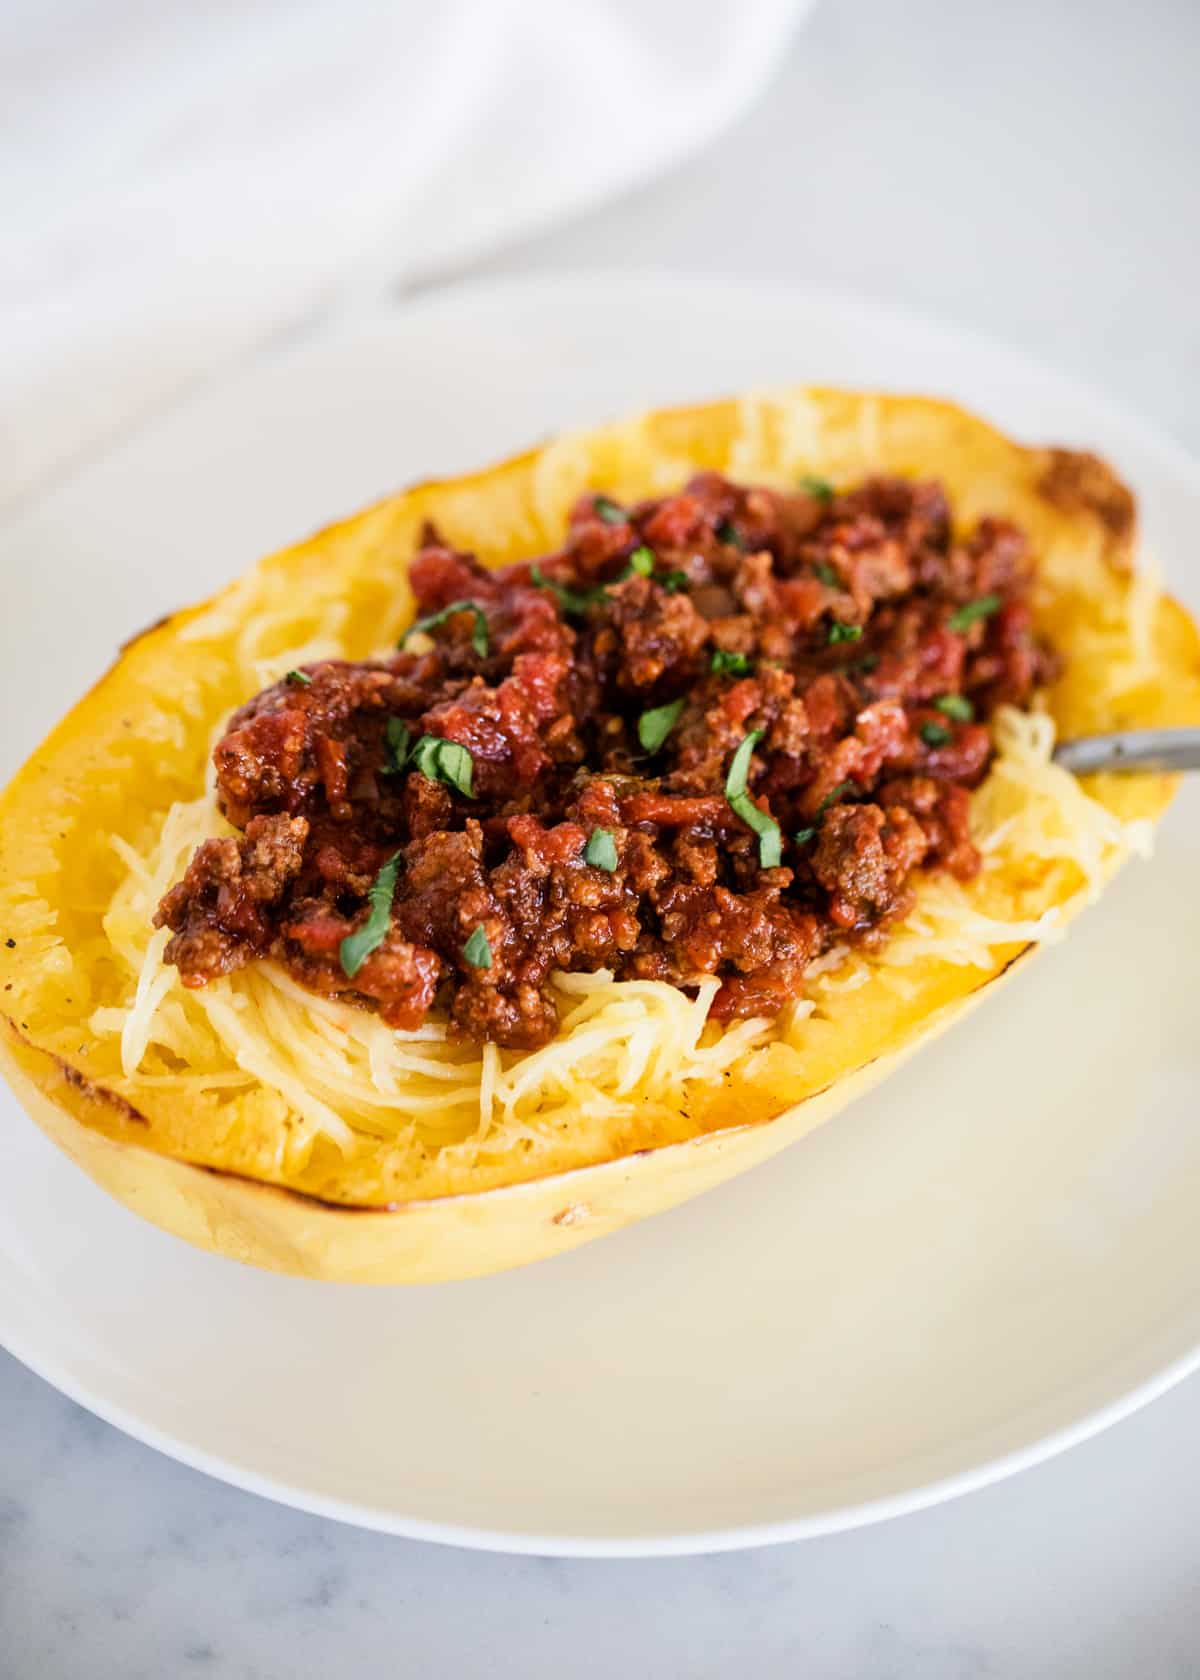 Spaghetti squash boat with meat sauce.